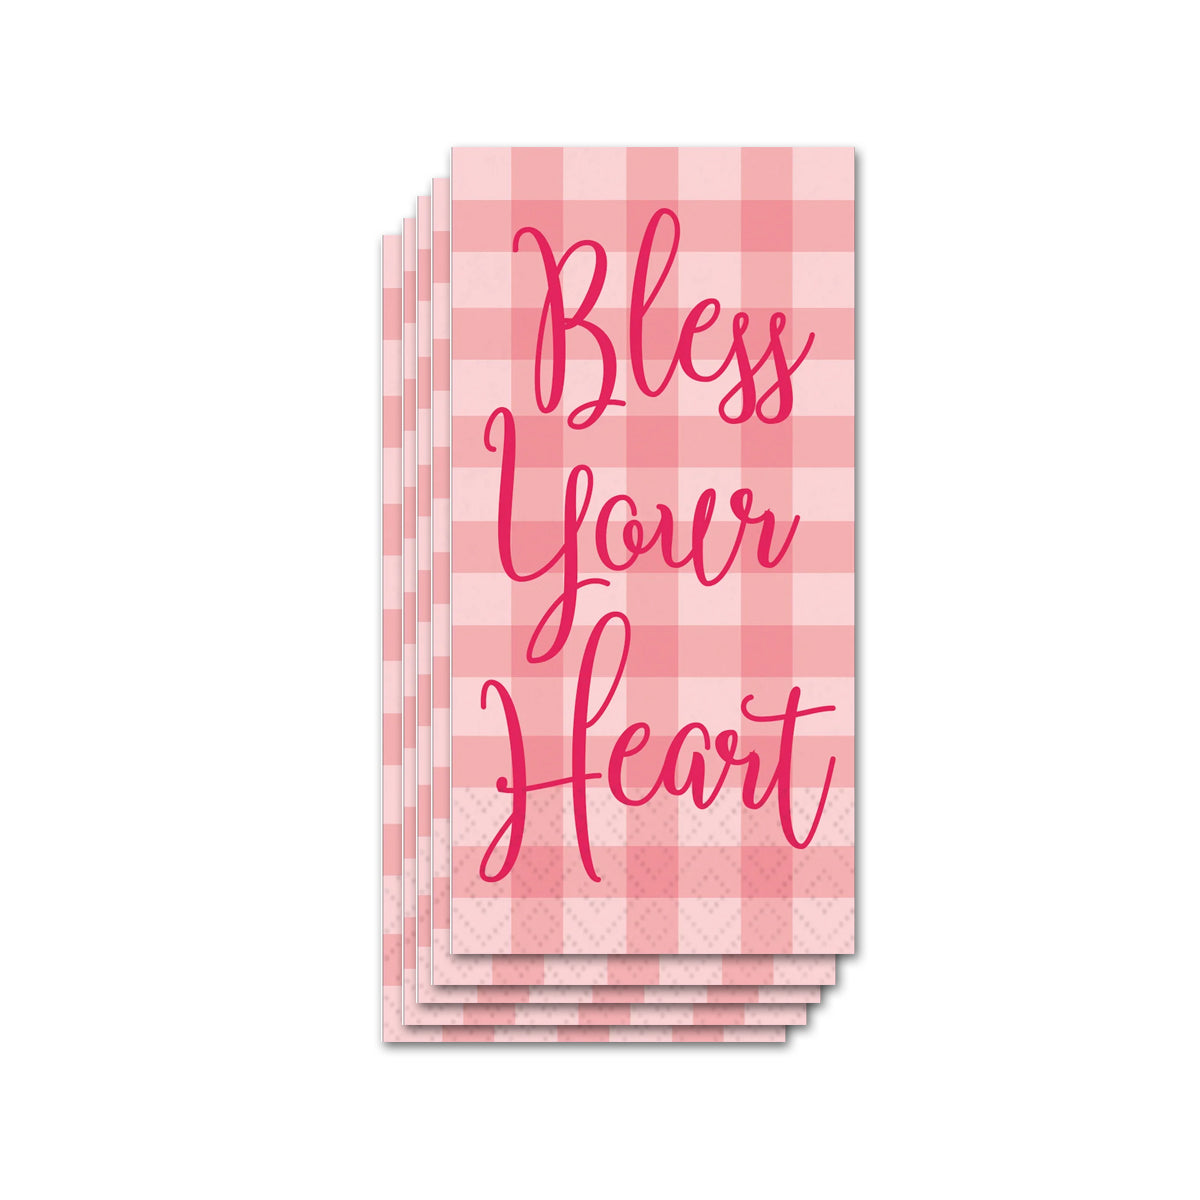 Bless Your Heart Paper Pocket Tissues